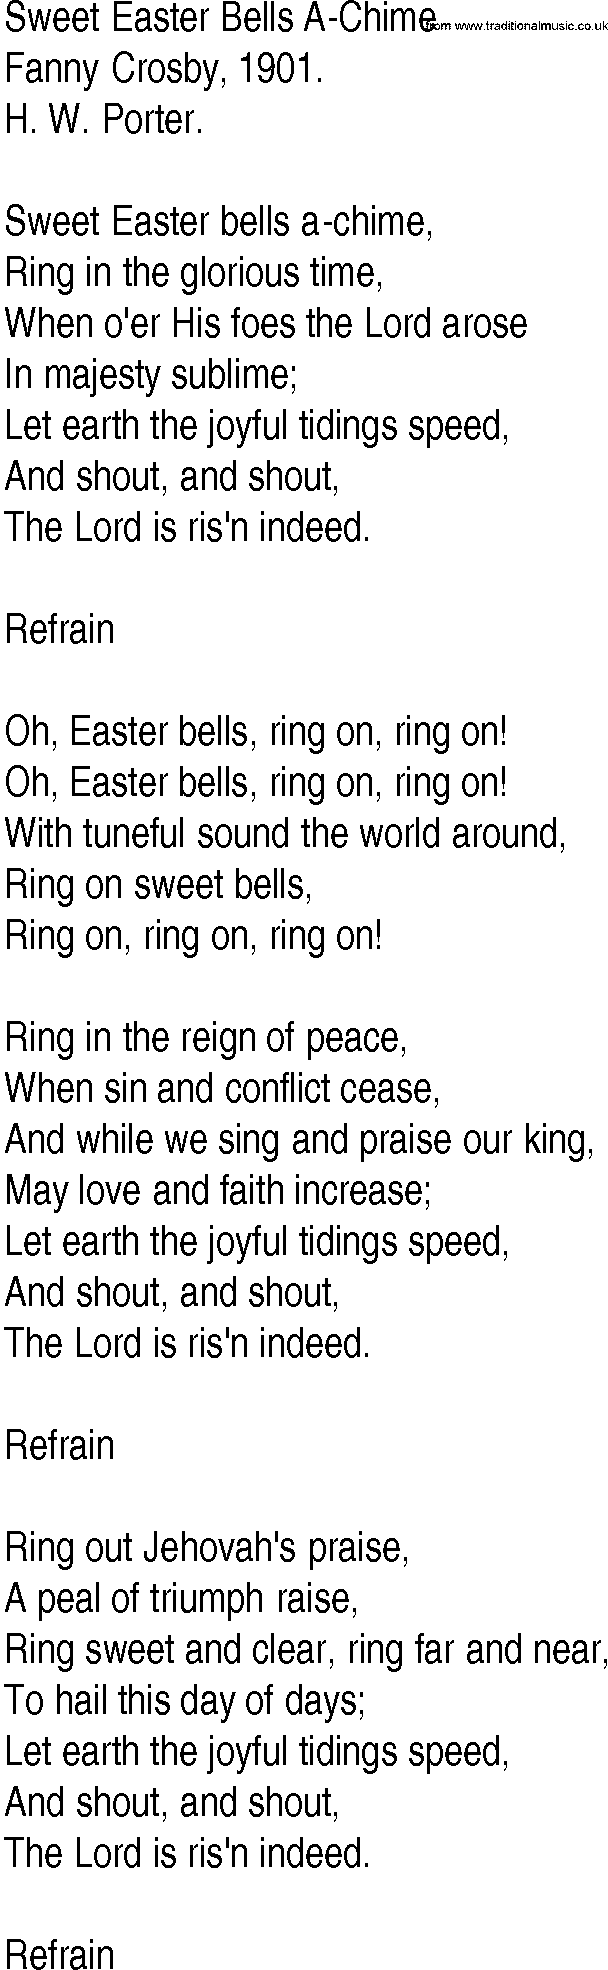 Hymn and Gospel Song: Sweet Easter Bells A-Chime by Fanny Crosby lyrics